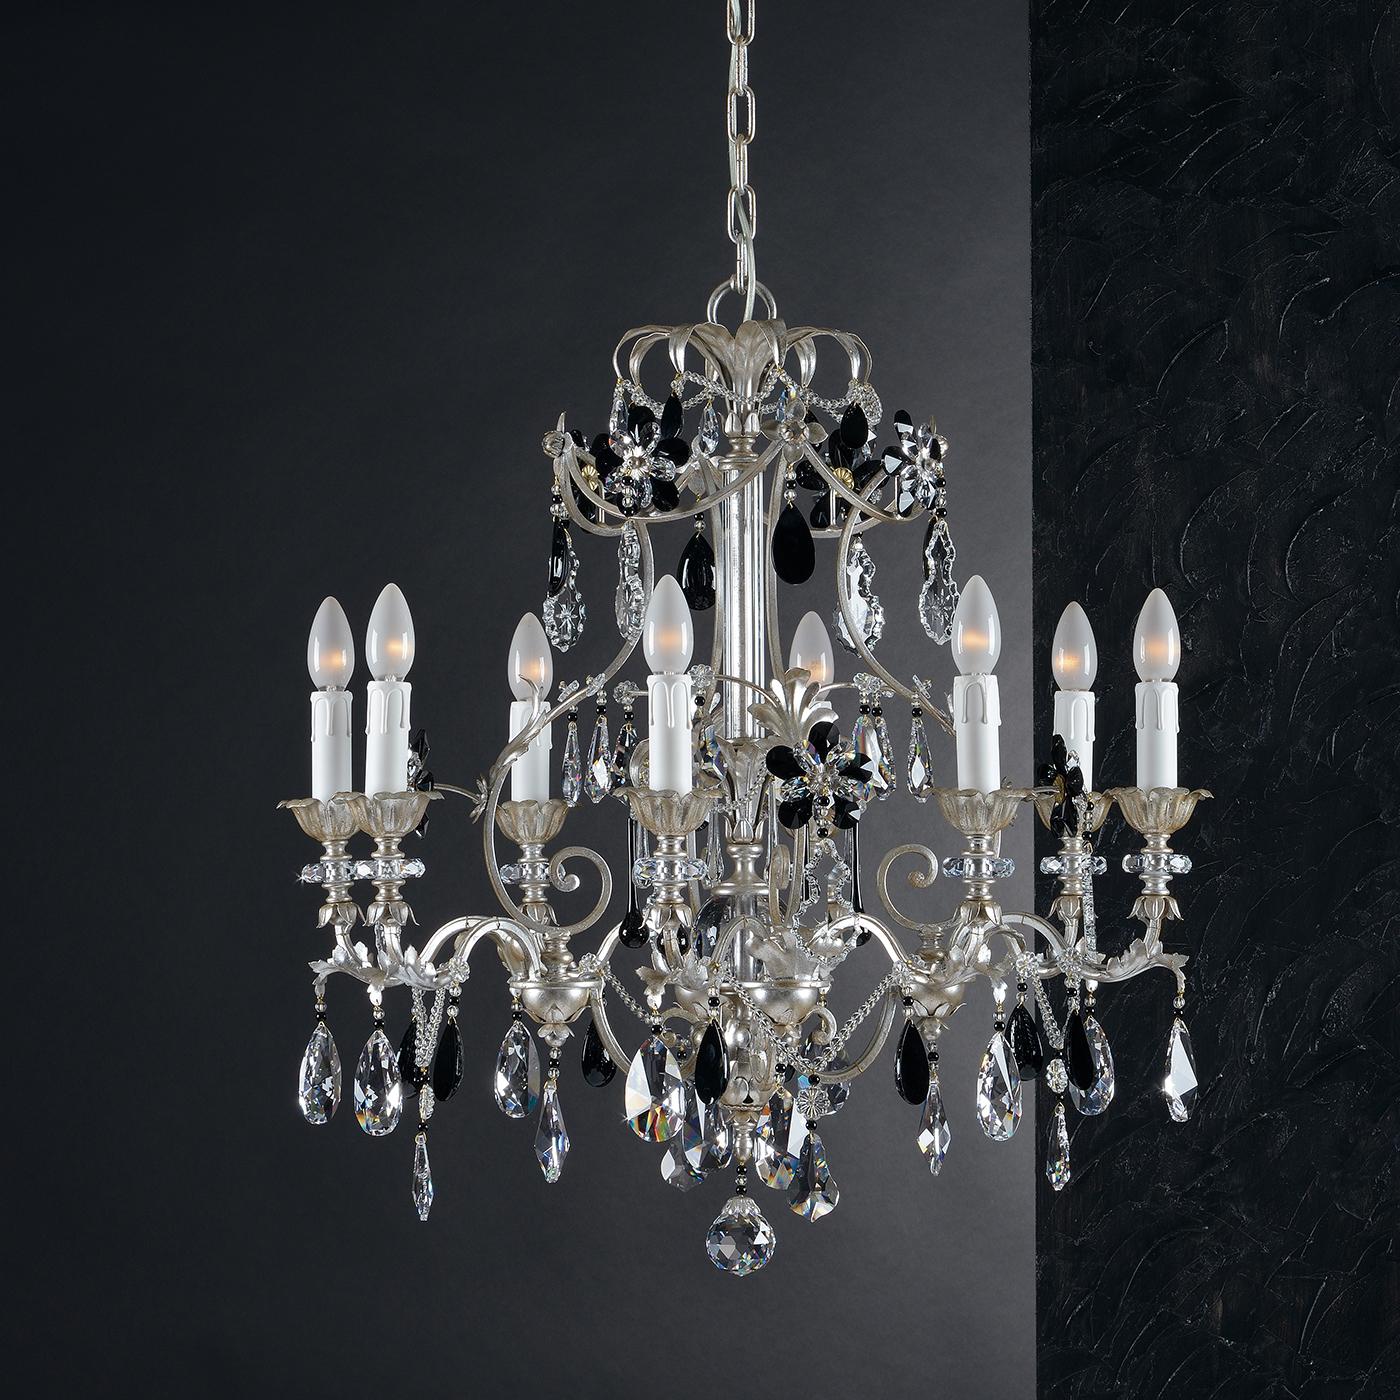 A traditional chandelier gets a modern makeover in the 1412 Chandelier. Featuring a glistening silver leaf finish, the chandelier has eight arms, each with a candle-inspired light. Topping the chandelier off are multifaceted crystals, alternating in